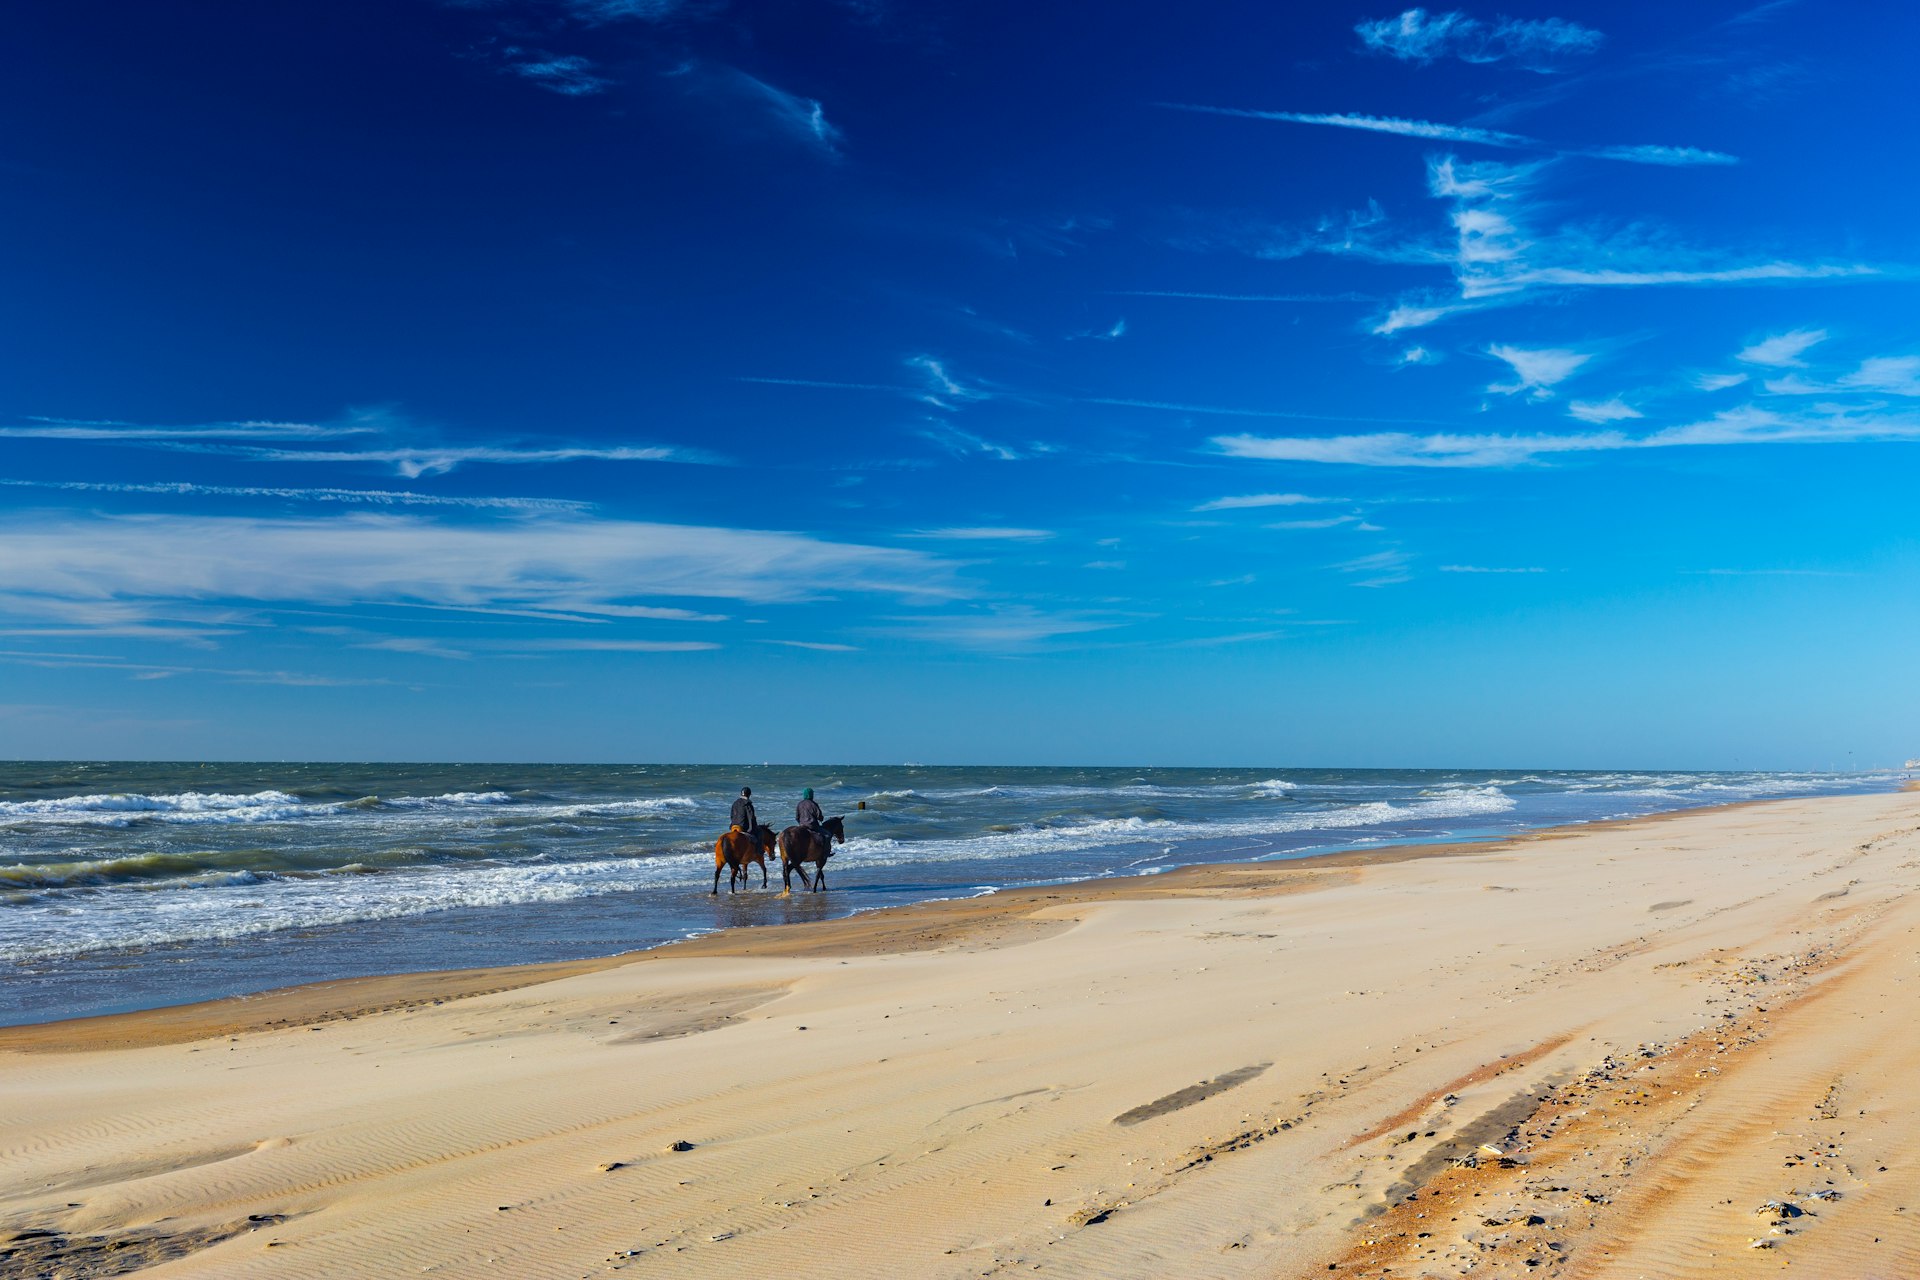 Two people on horseback ride along the beach on a sunny day